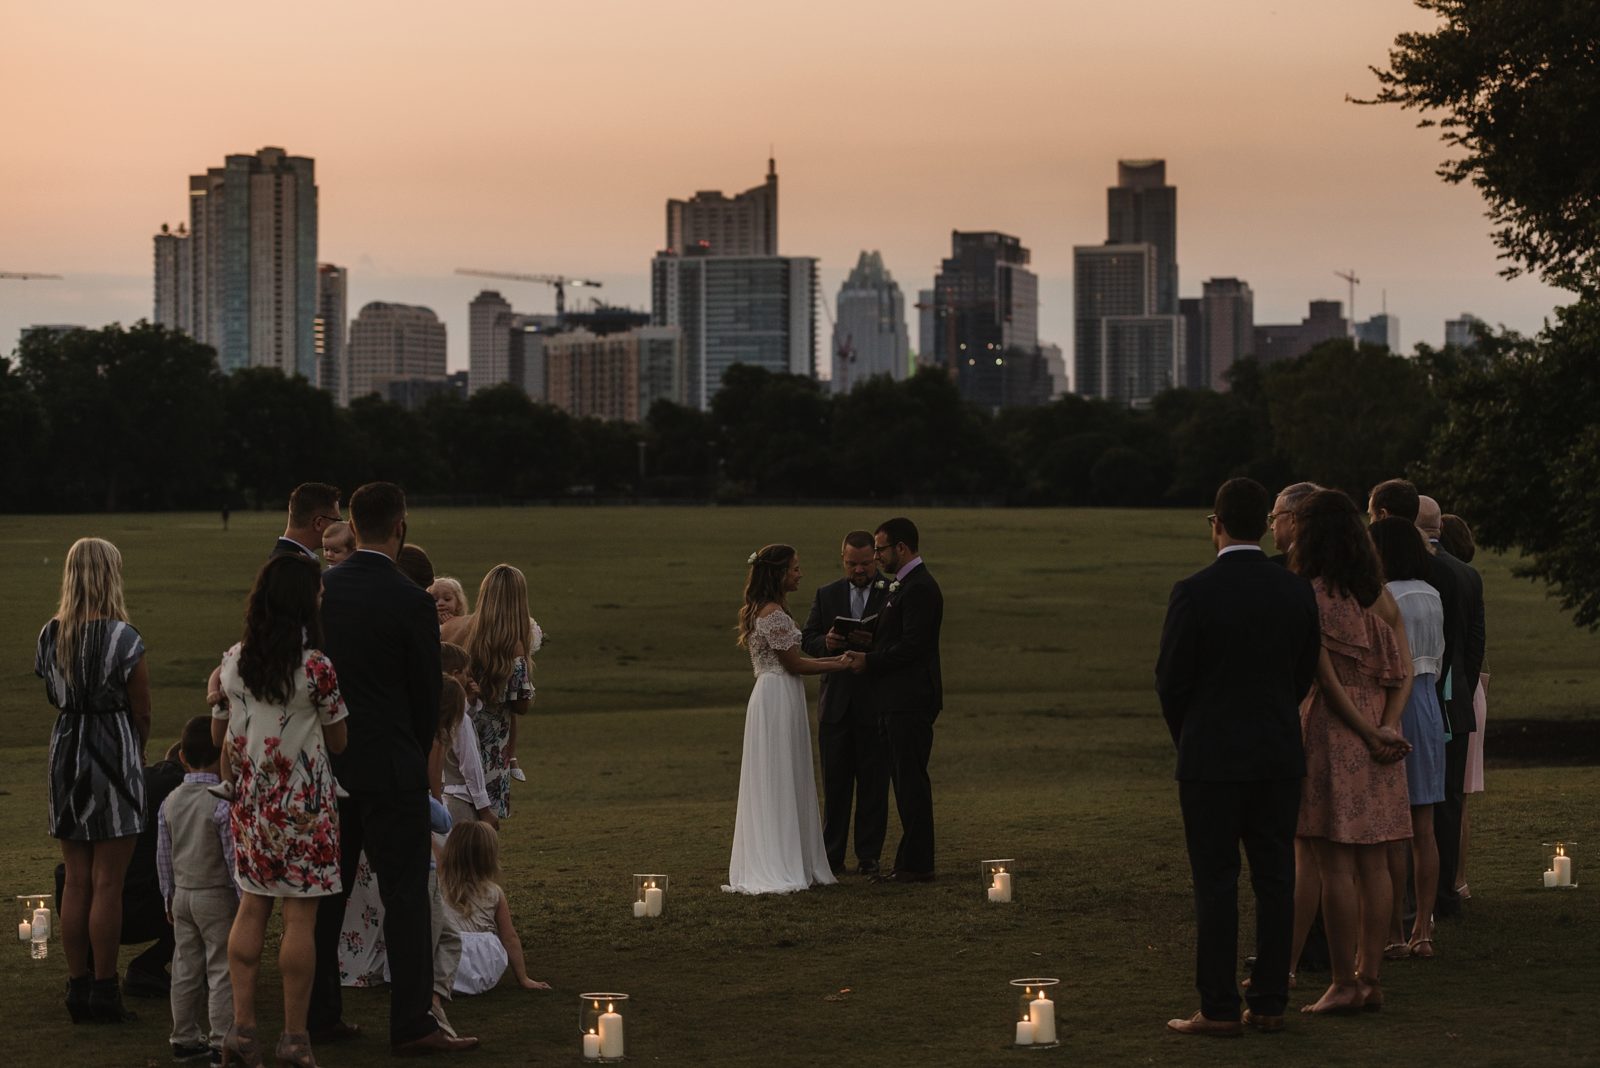 Sunrise, candle-lit elopement in Zilker Park with the Austin skyline in the background